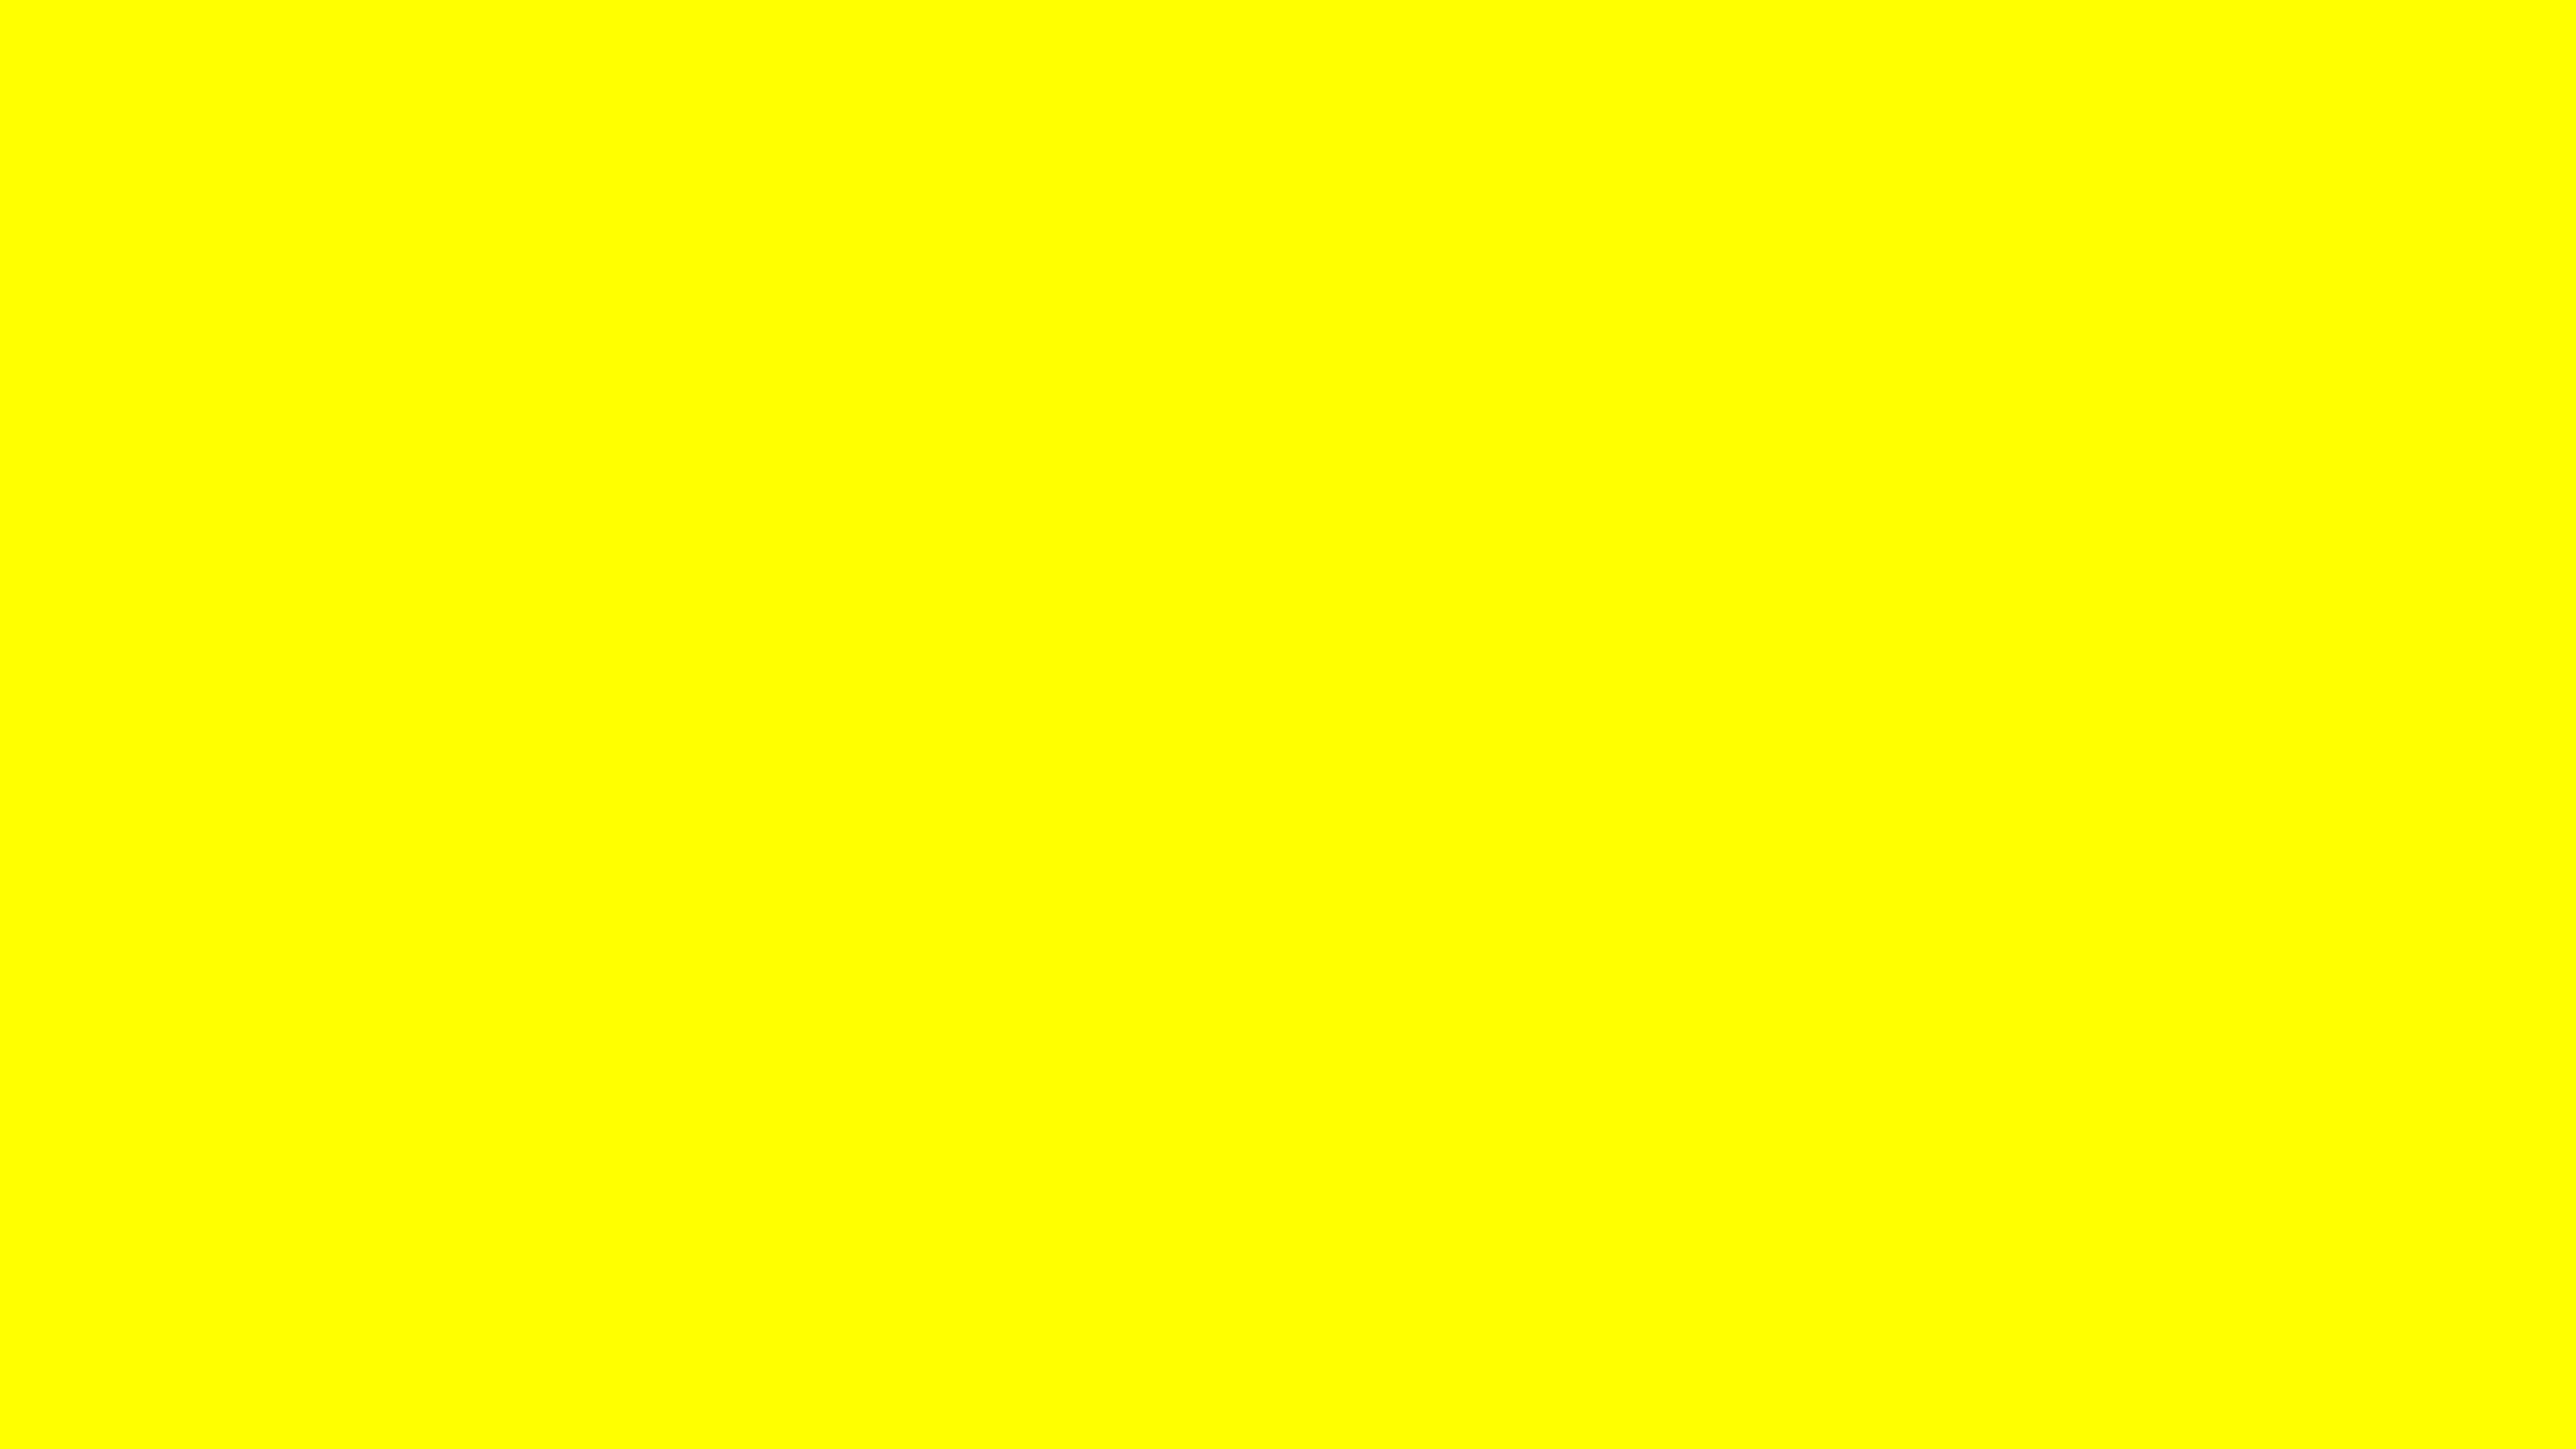 3840x2160 Yellow Solid Color Background